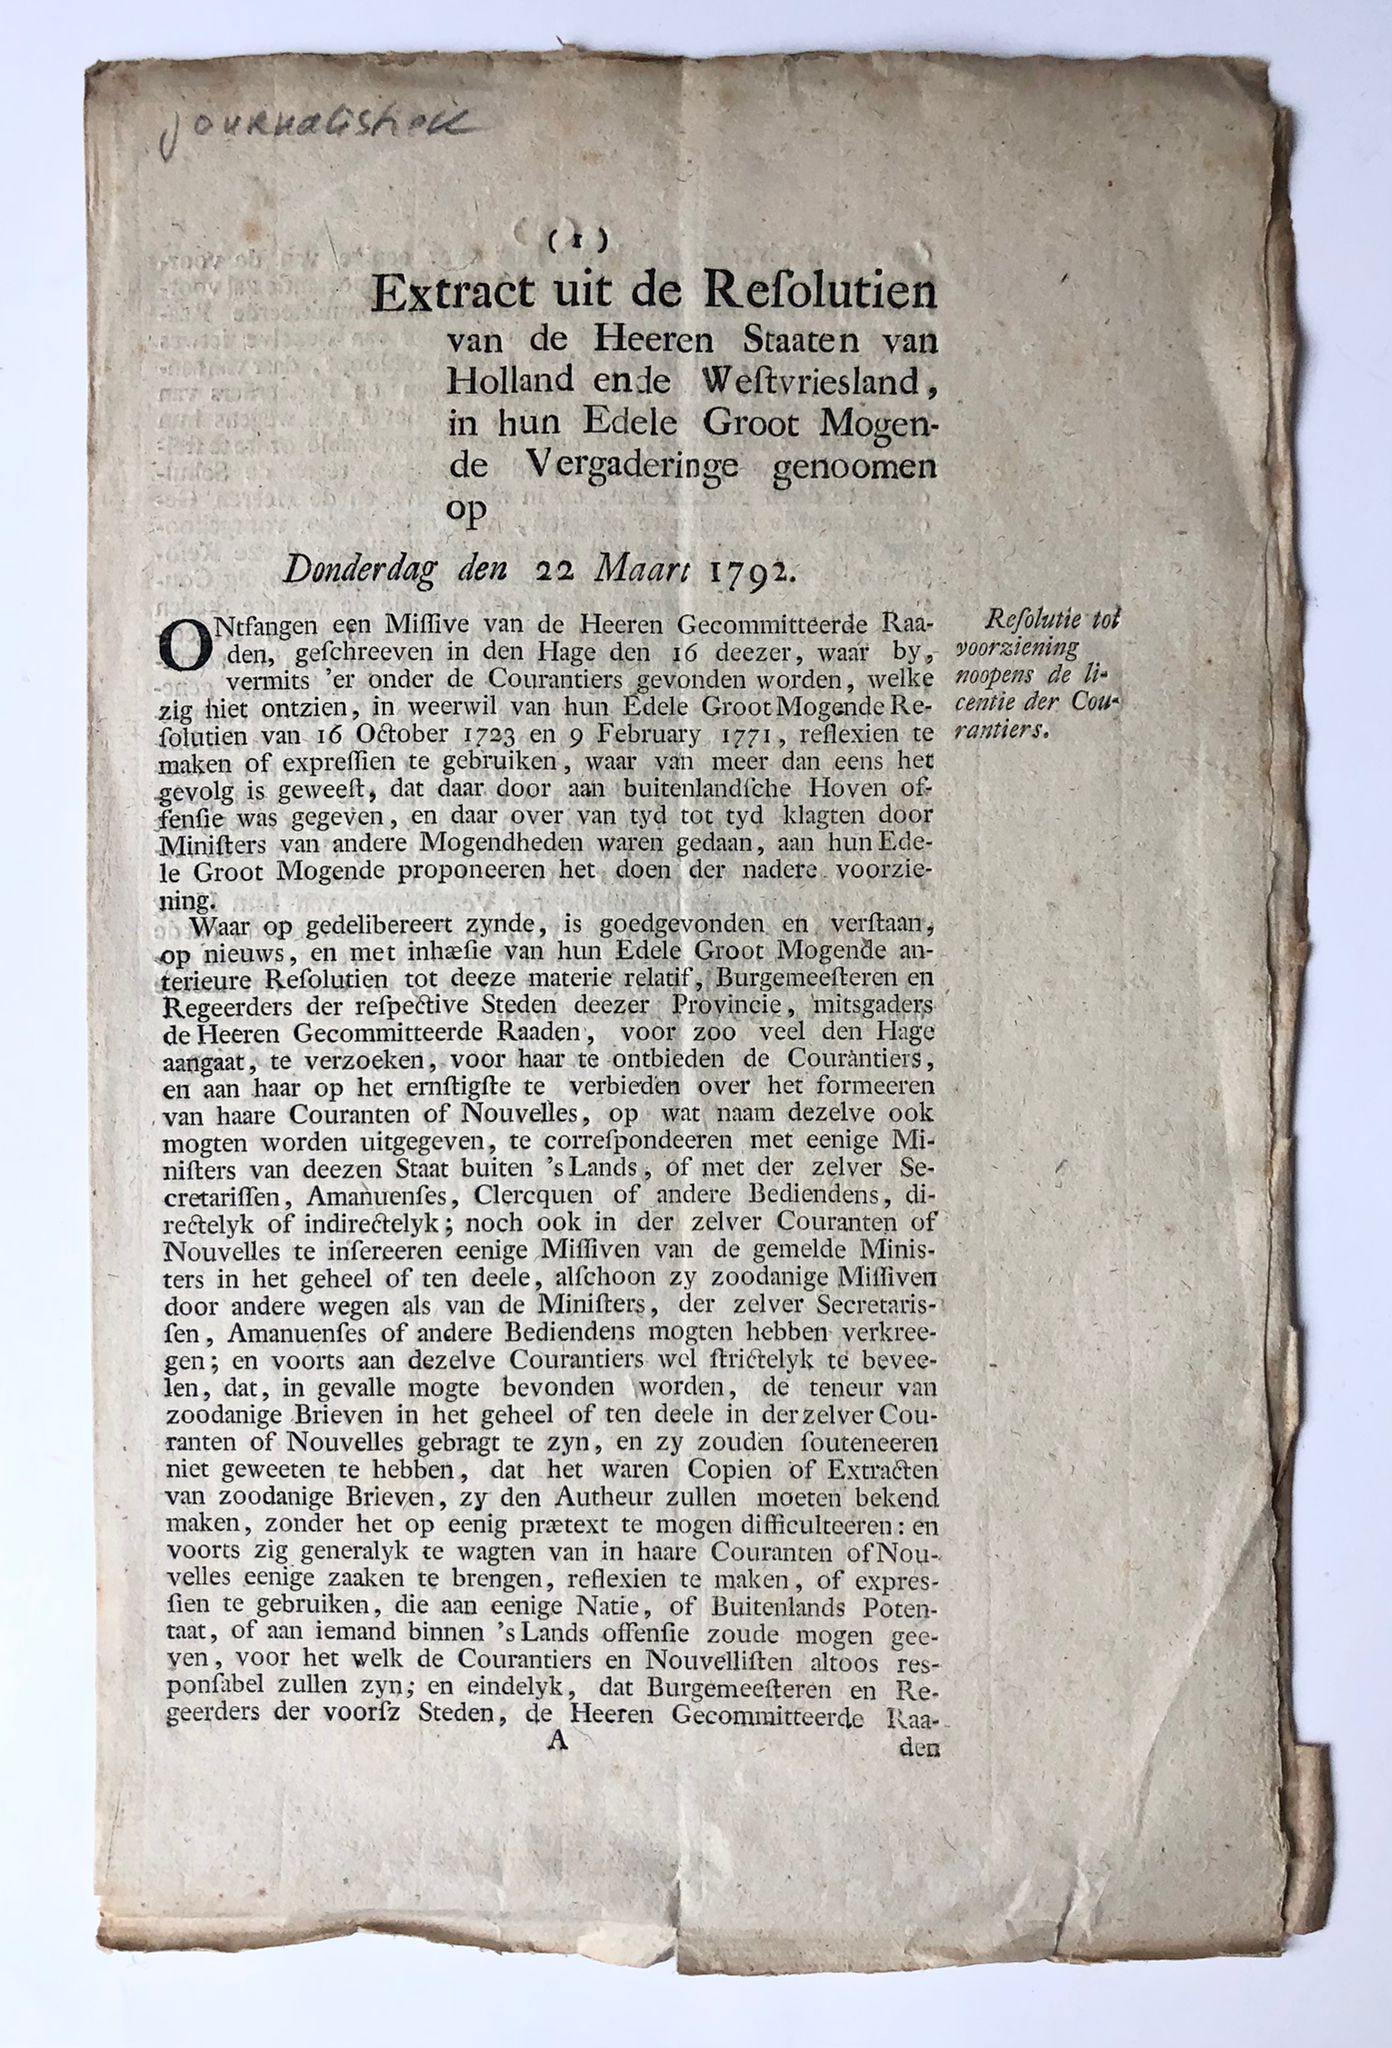 [Printed publication, printed press, 1792] Printed publication " Extract uit resolutien Staten van Holland d.d. 22-3-1792" about licence of newspapers (licentie der courantiers), 2 pp, folio.